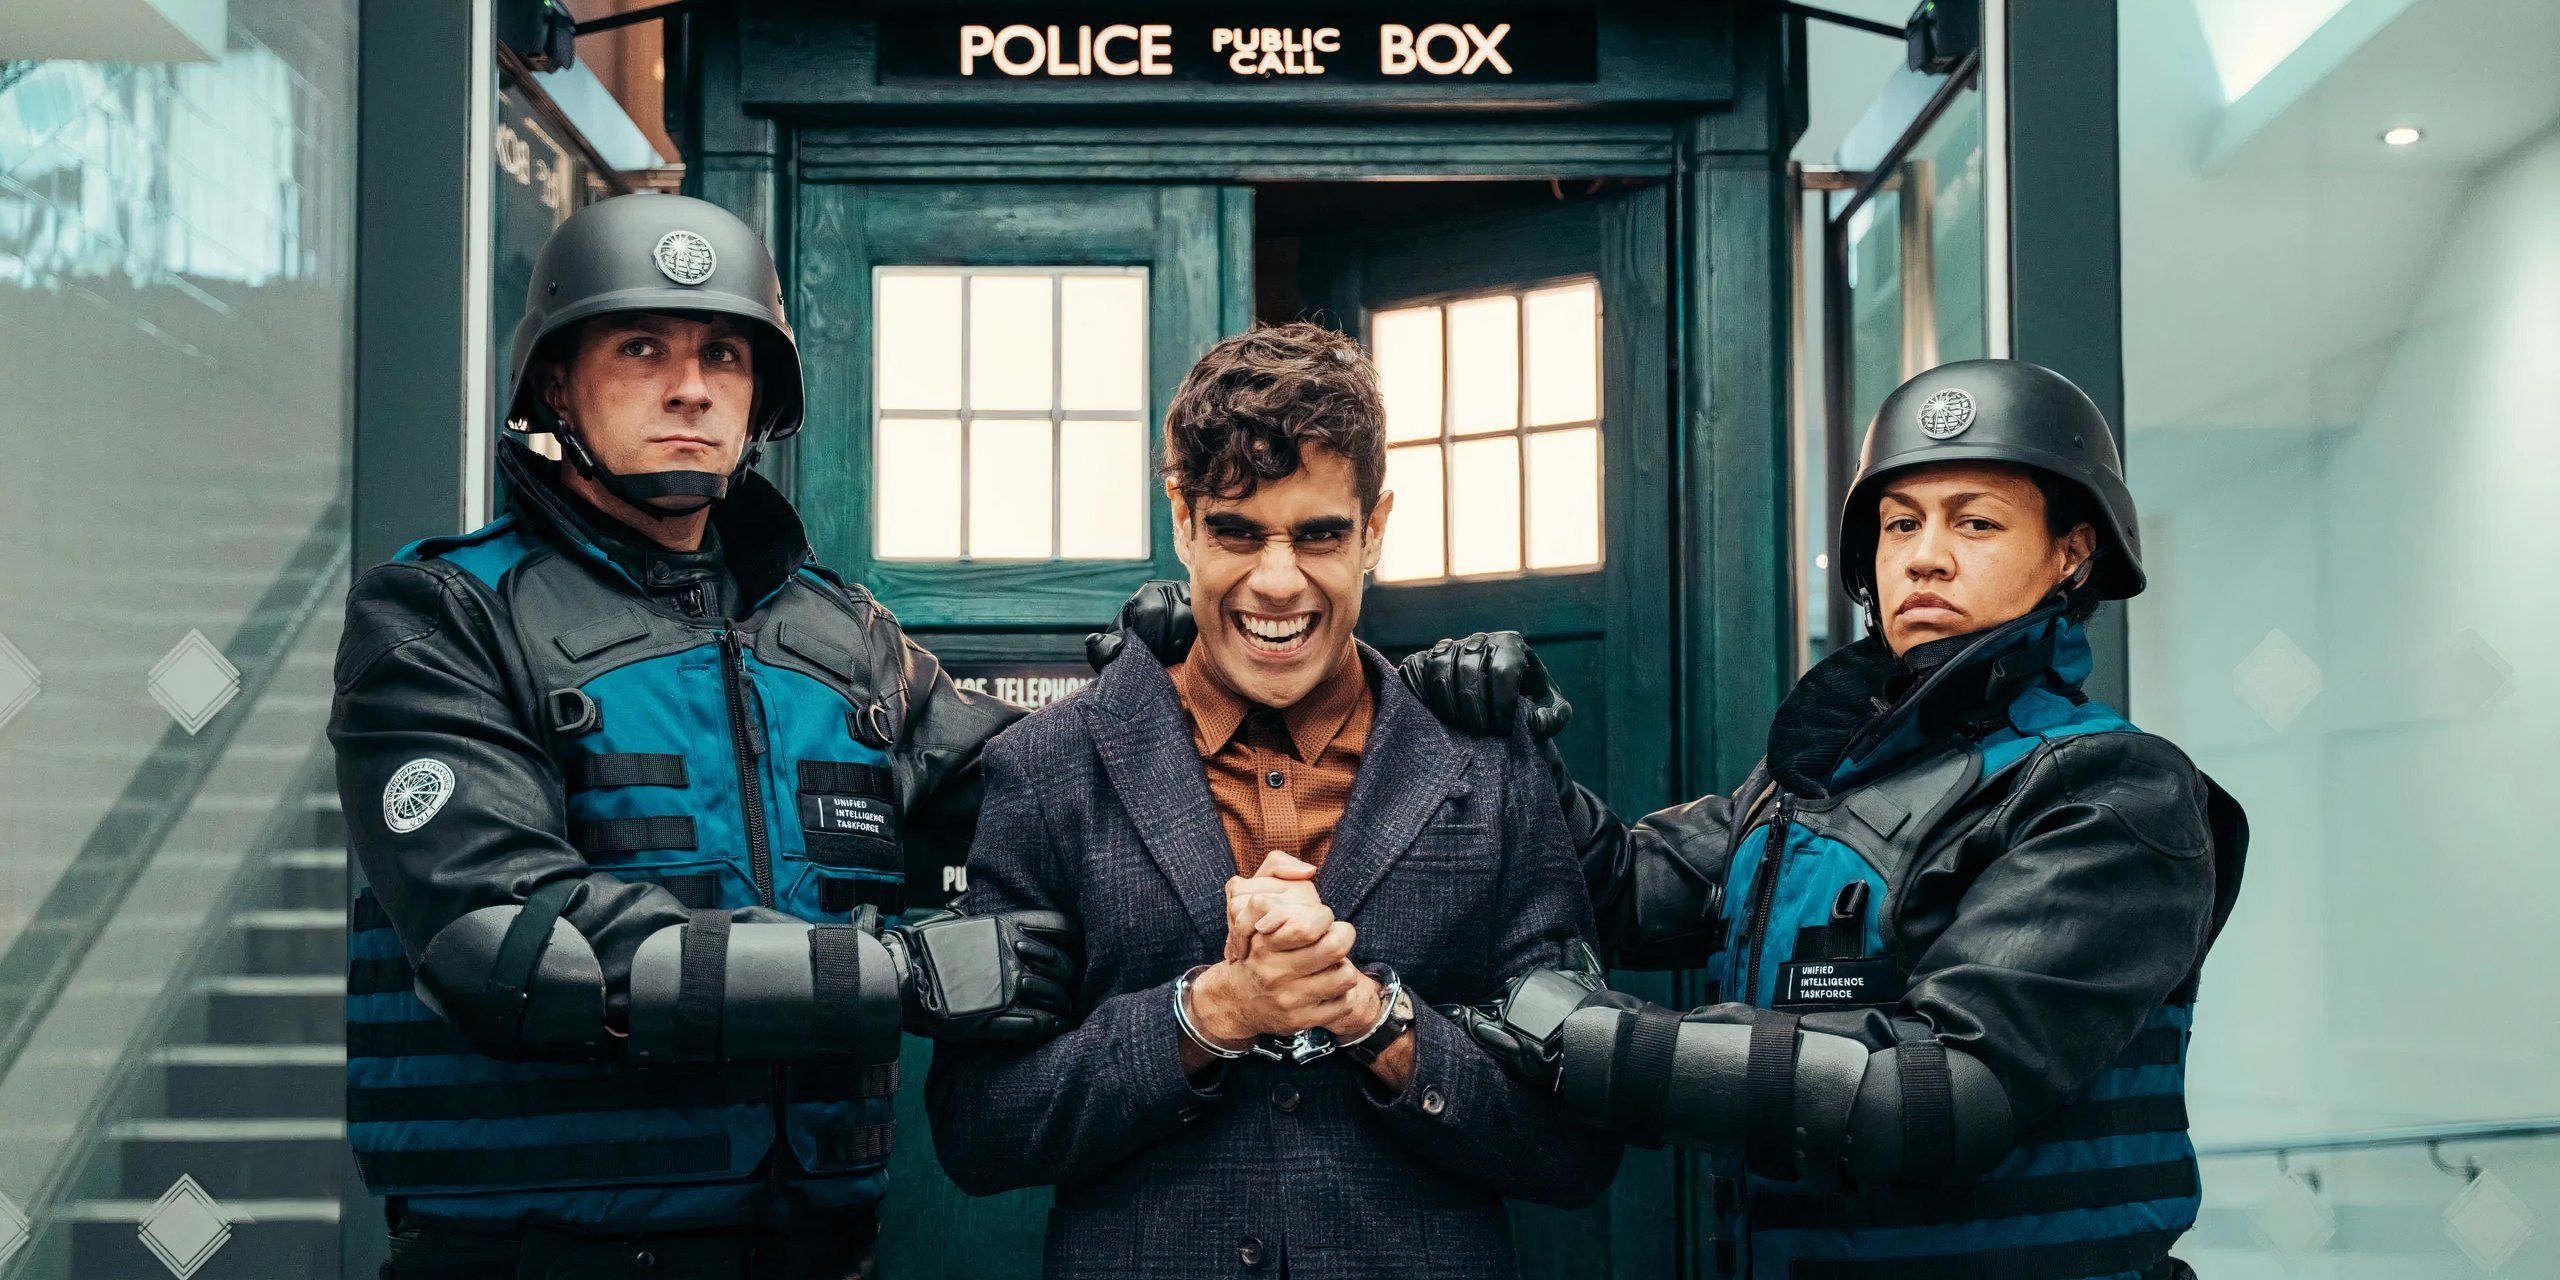 The Master is arrested outside the TARDIS, smiling